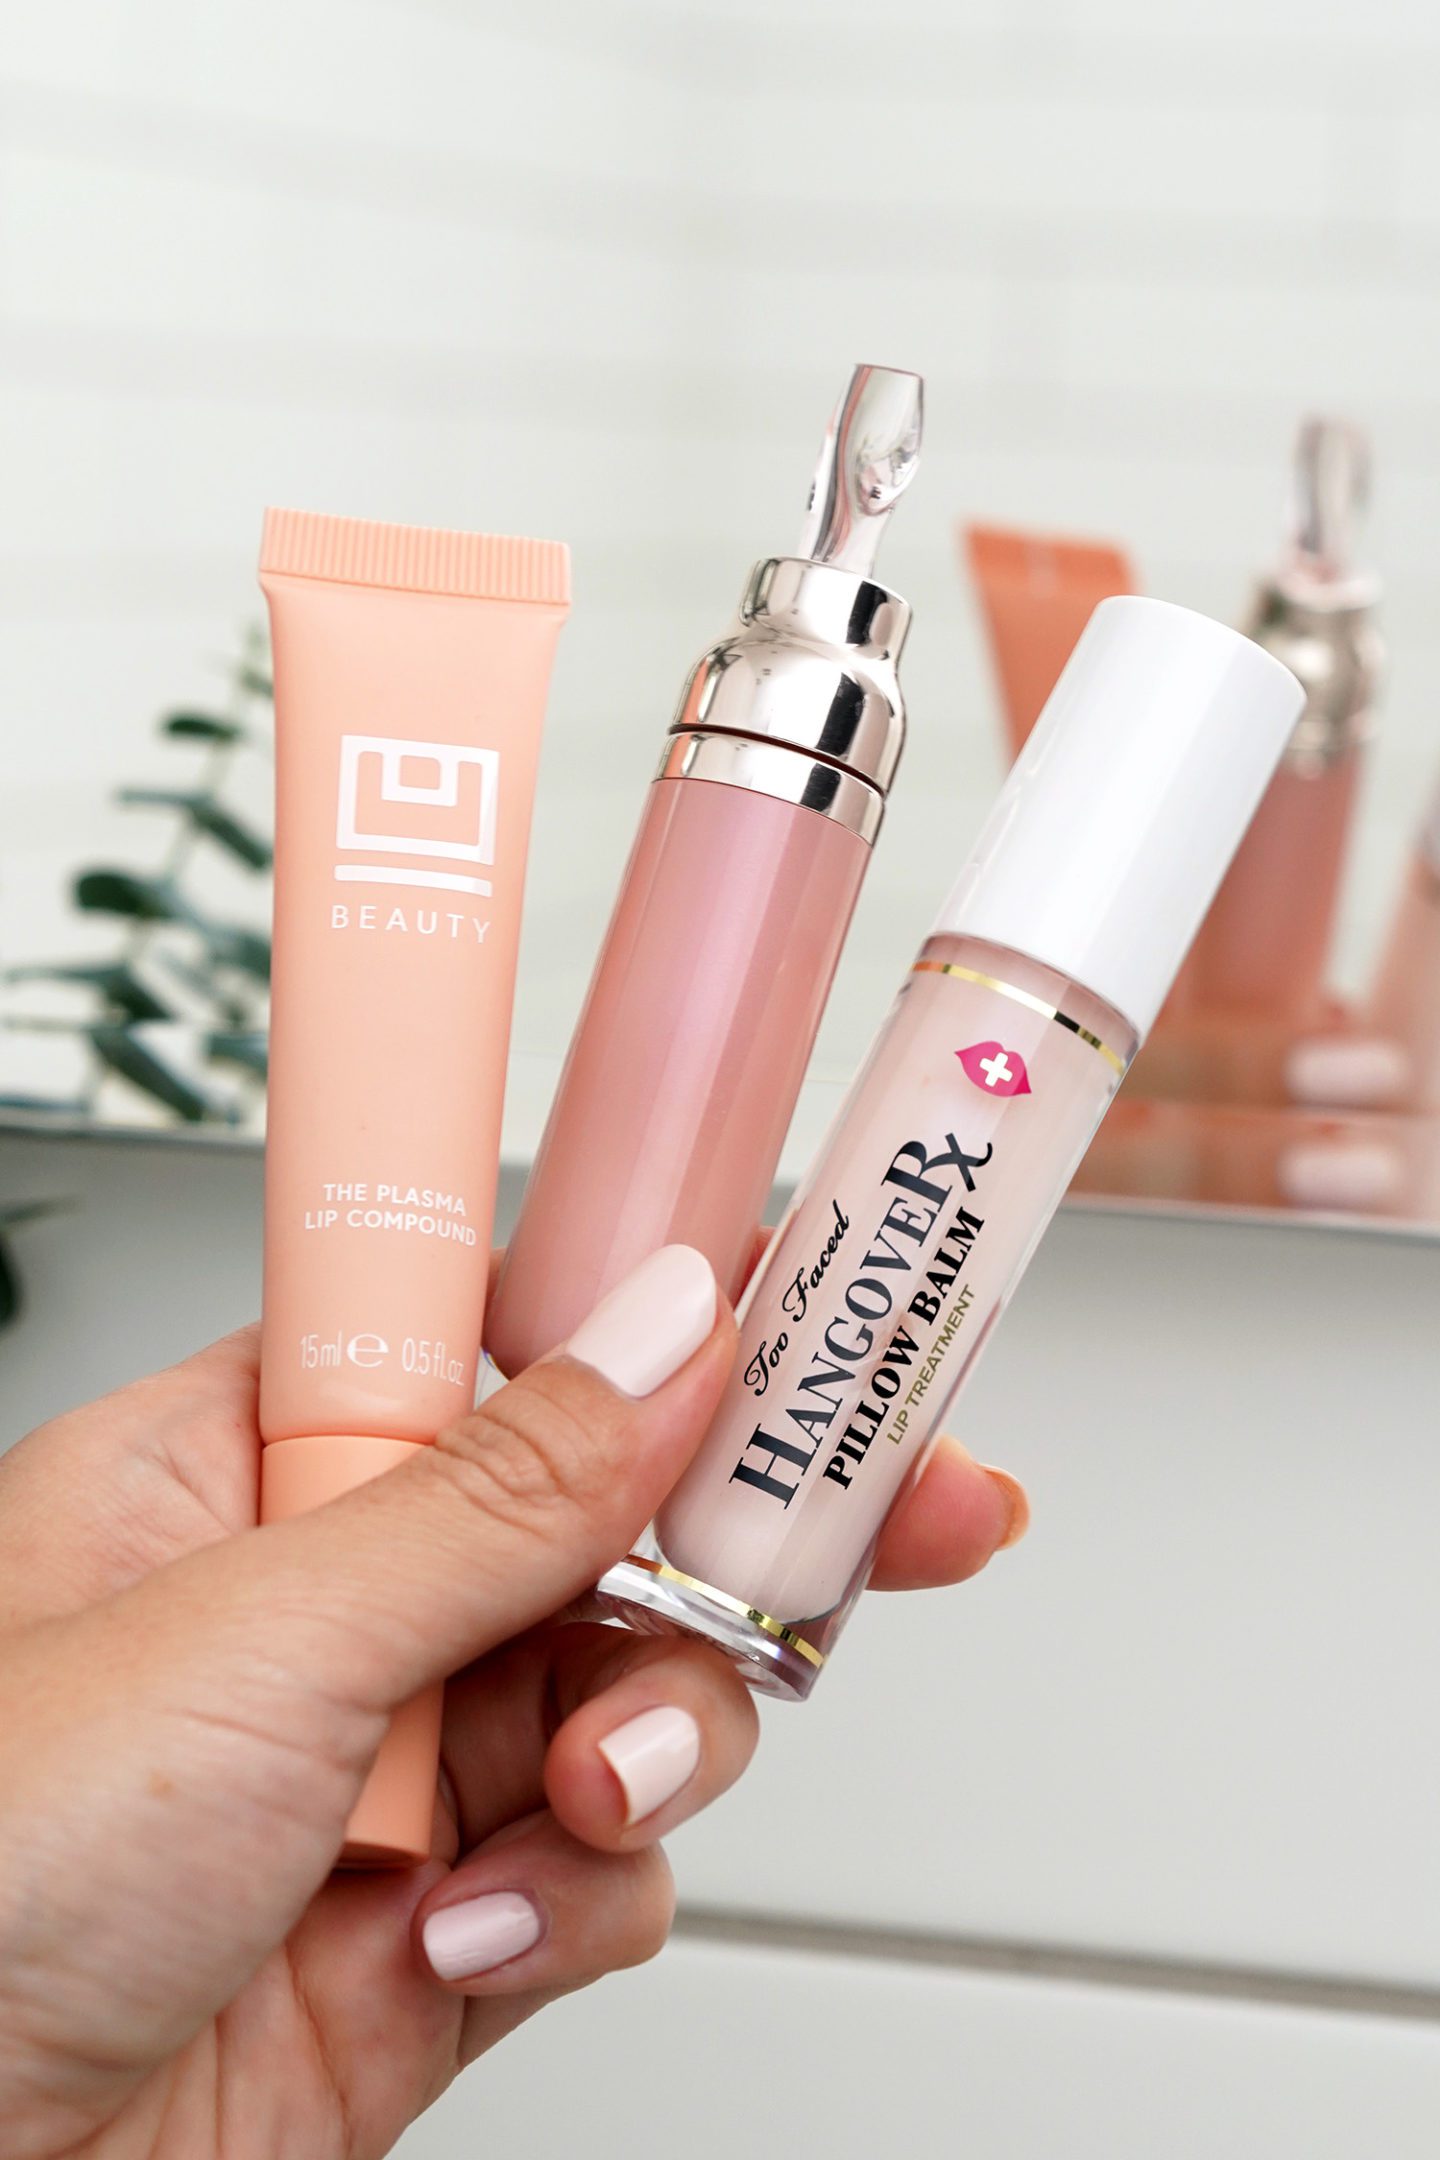 Favorite Clear Lip Balms U Beauty, La Mer and Too Faced